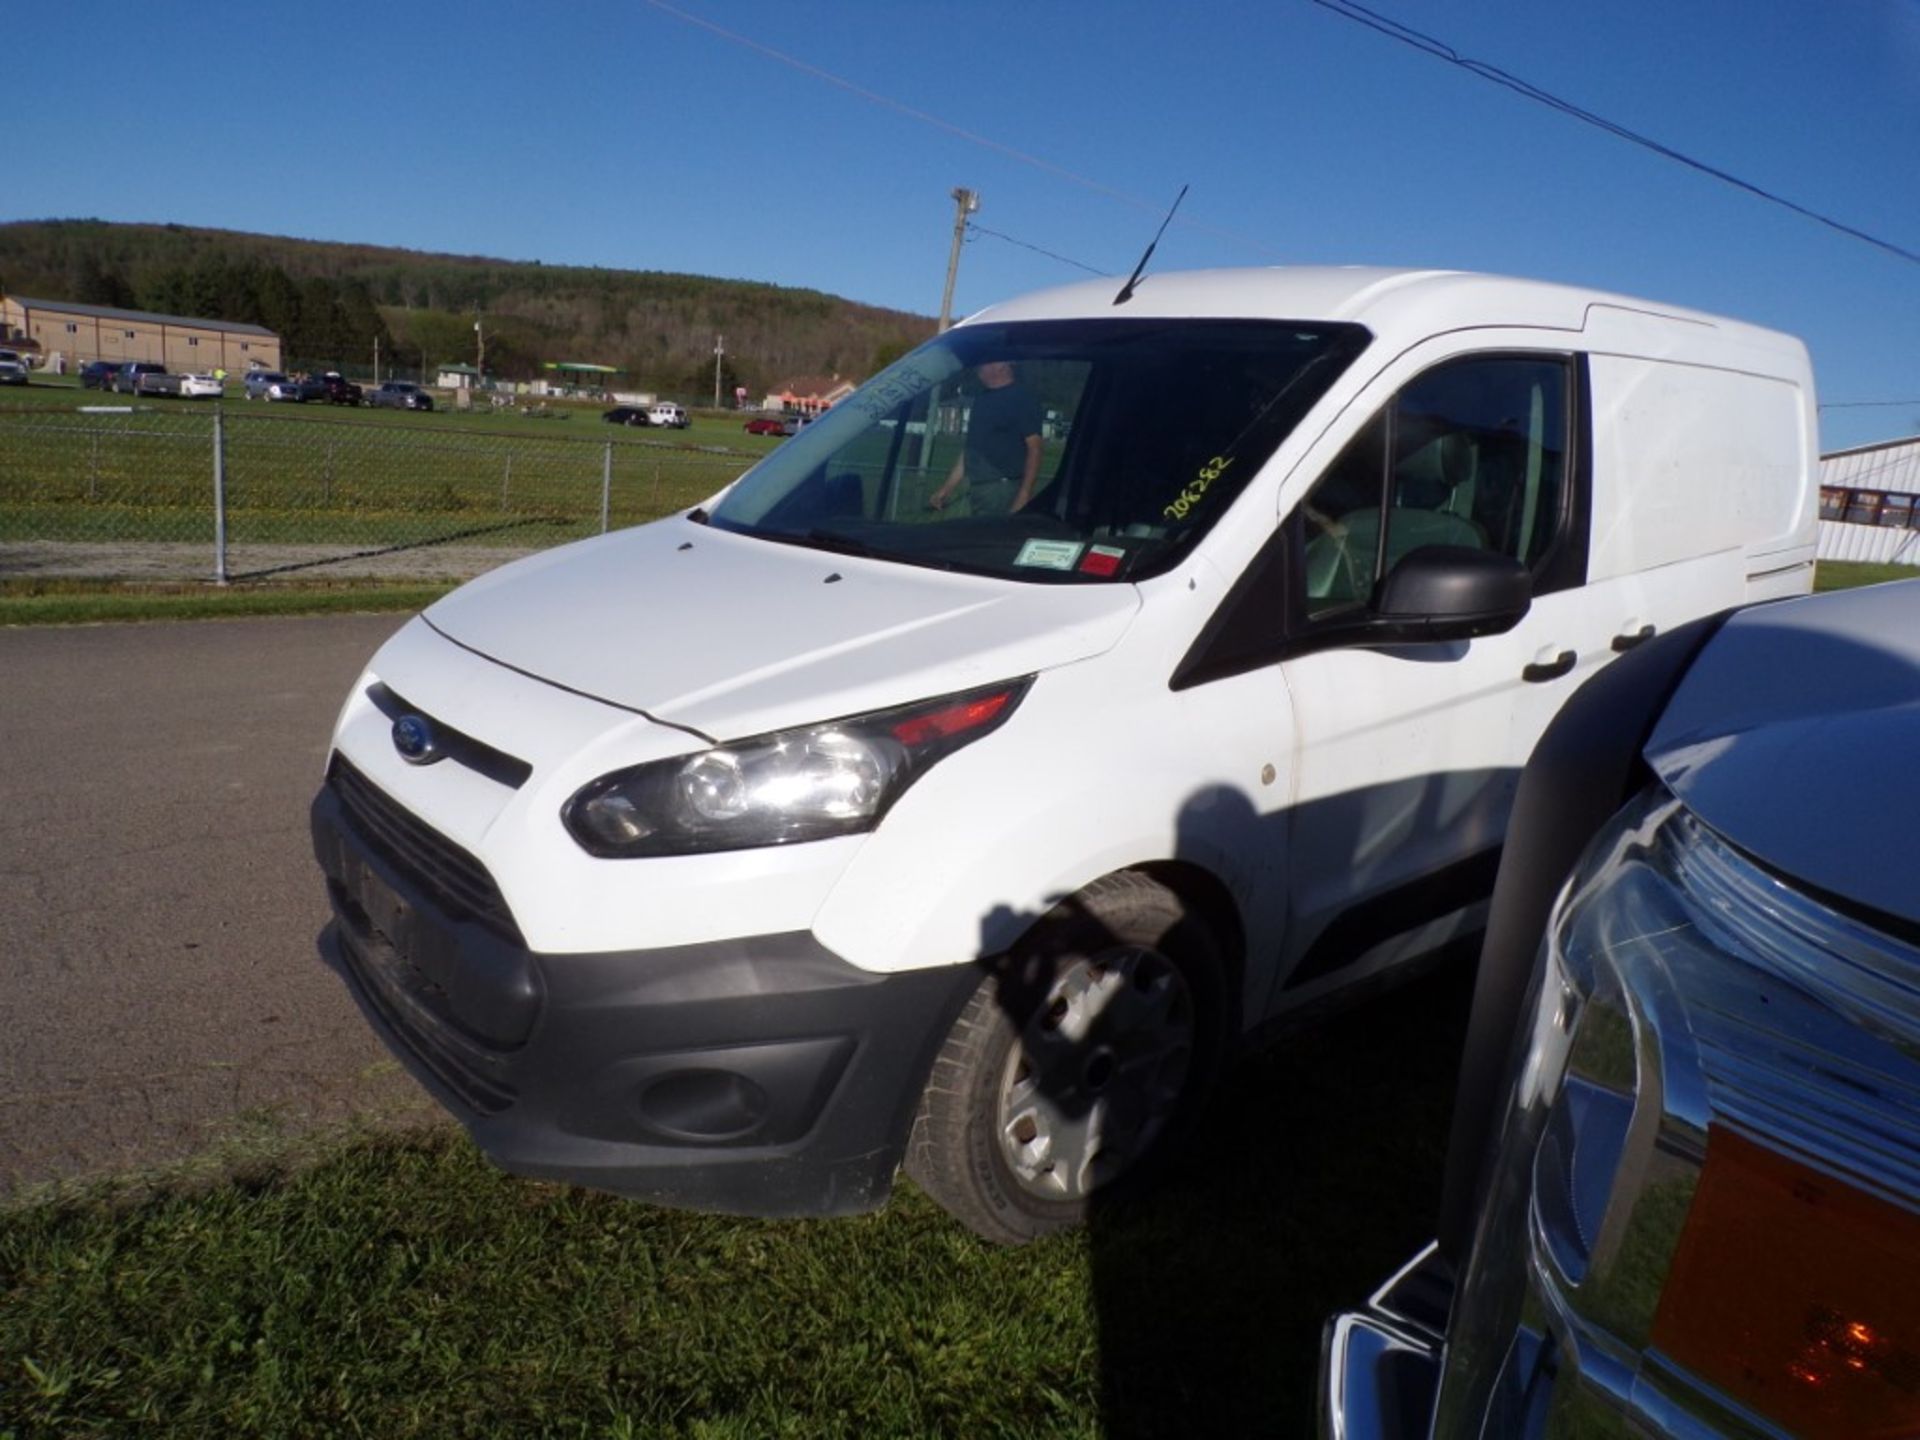 2016 Ford Transit Connect, Auto, White, 208,281 Miles, Vin # NM0LS6E73G1231962 (6561) - HAVE TITLE - Image 2 of 5